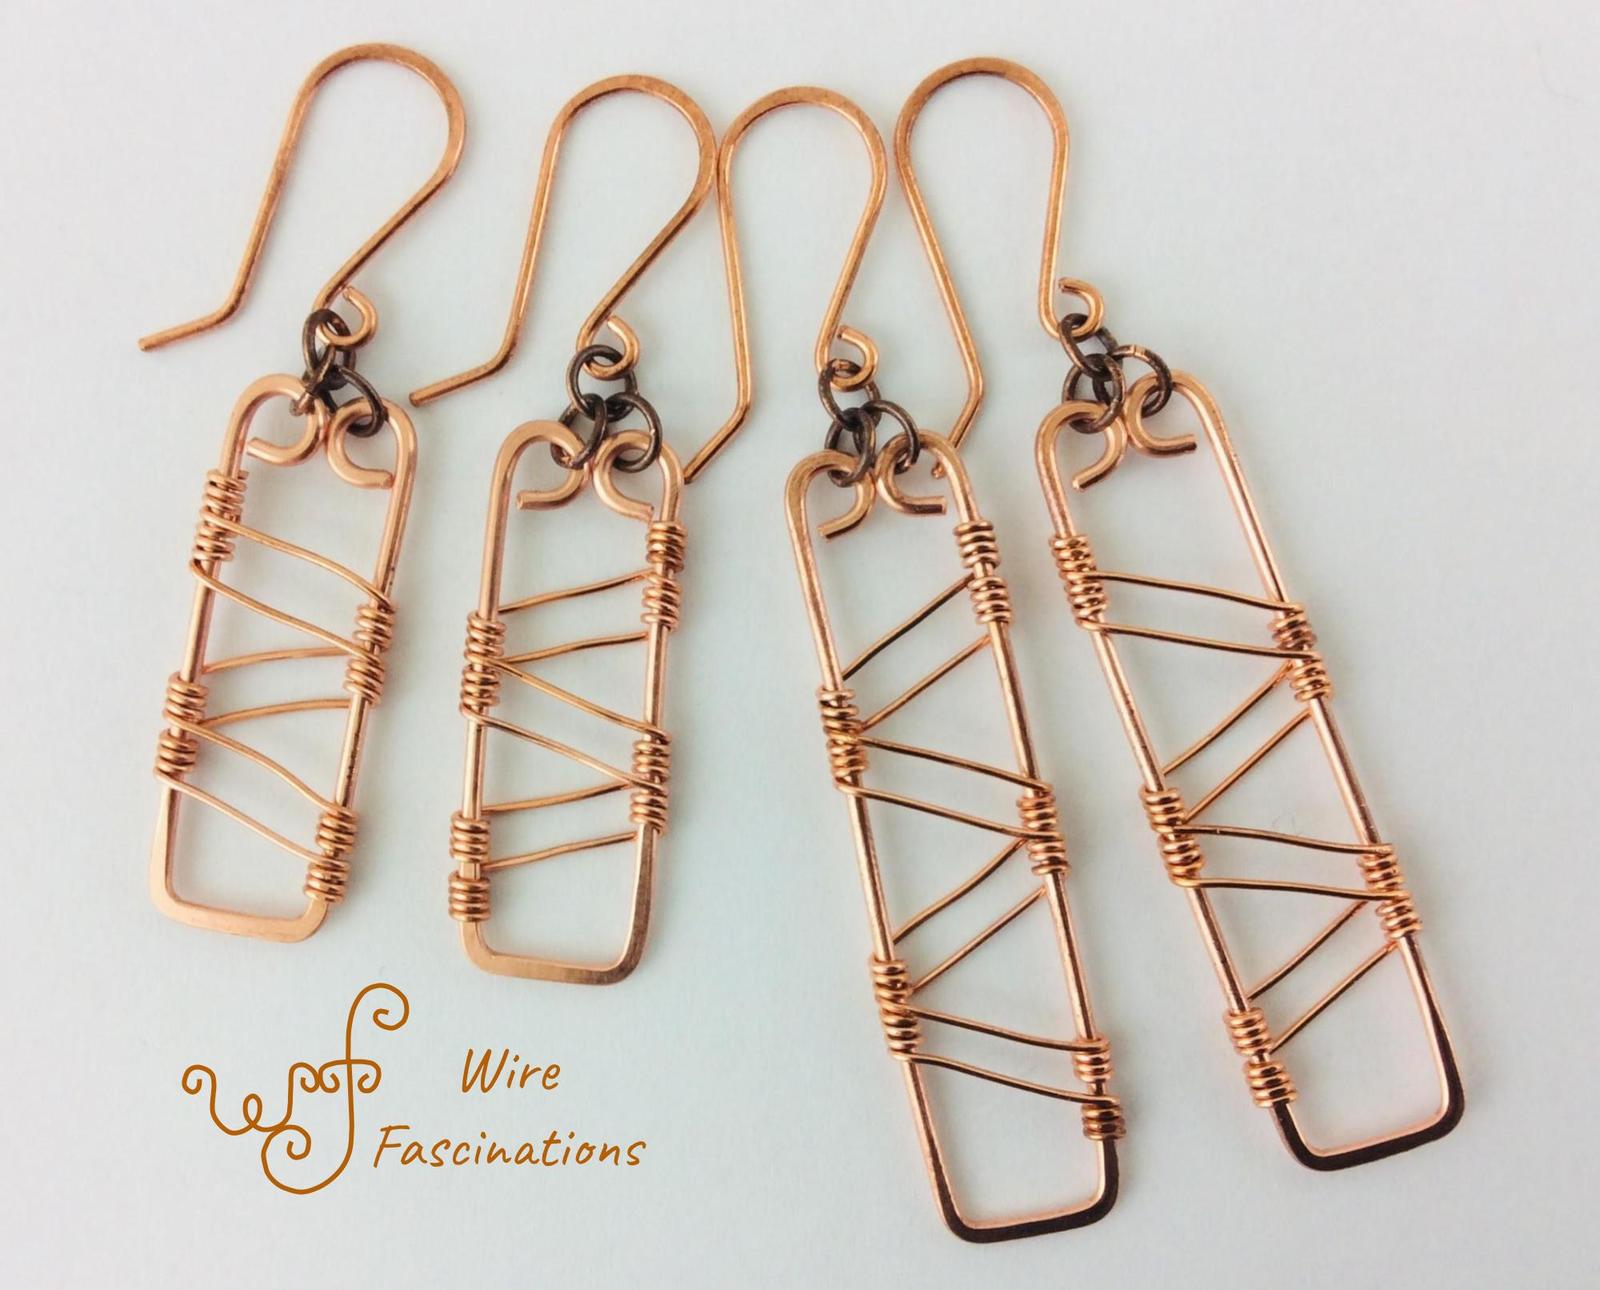 Handmade solid copper earrings: double diagonal wire wrapped rectangles - $28.00